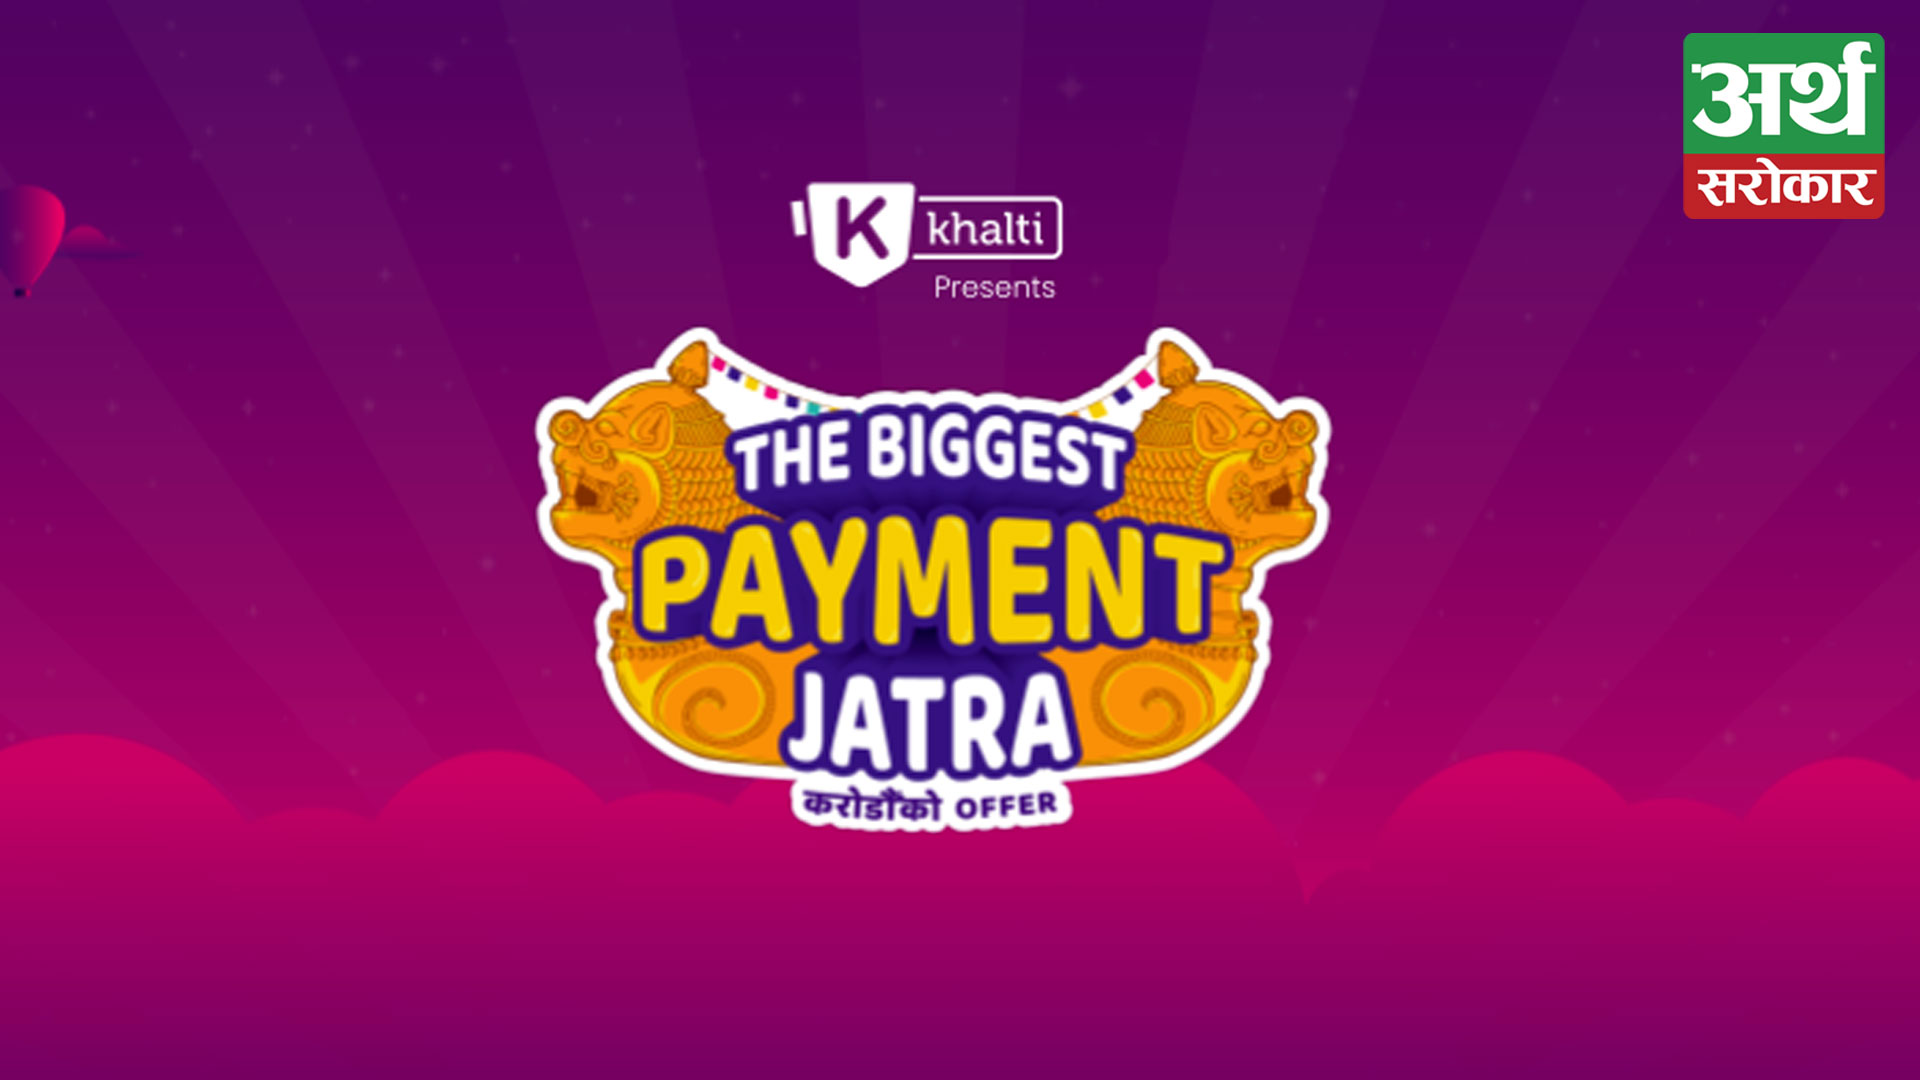 Khalti’s ‘The Biggest Payment Jatra’ offer successfully concluded